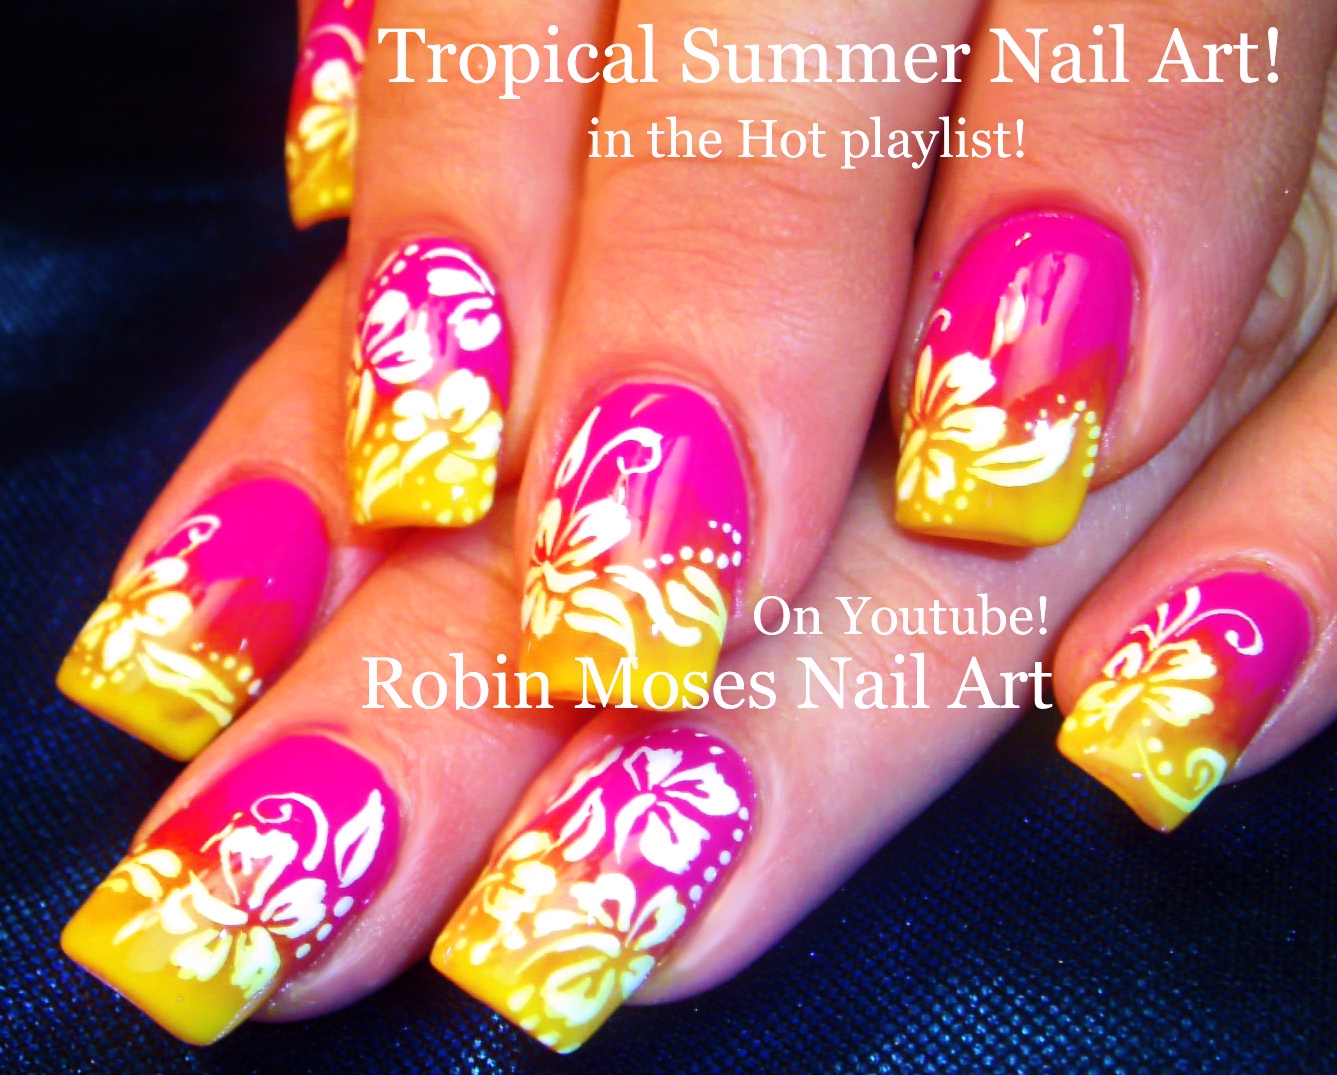 4. Glittery tropical nail design with gems - wide 2